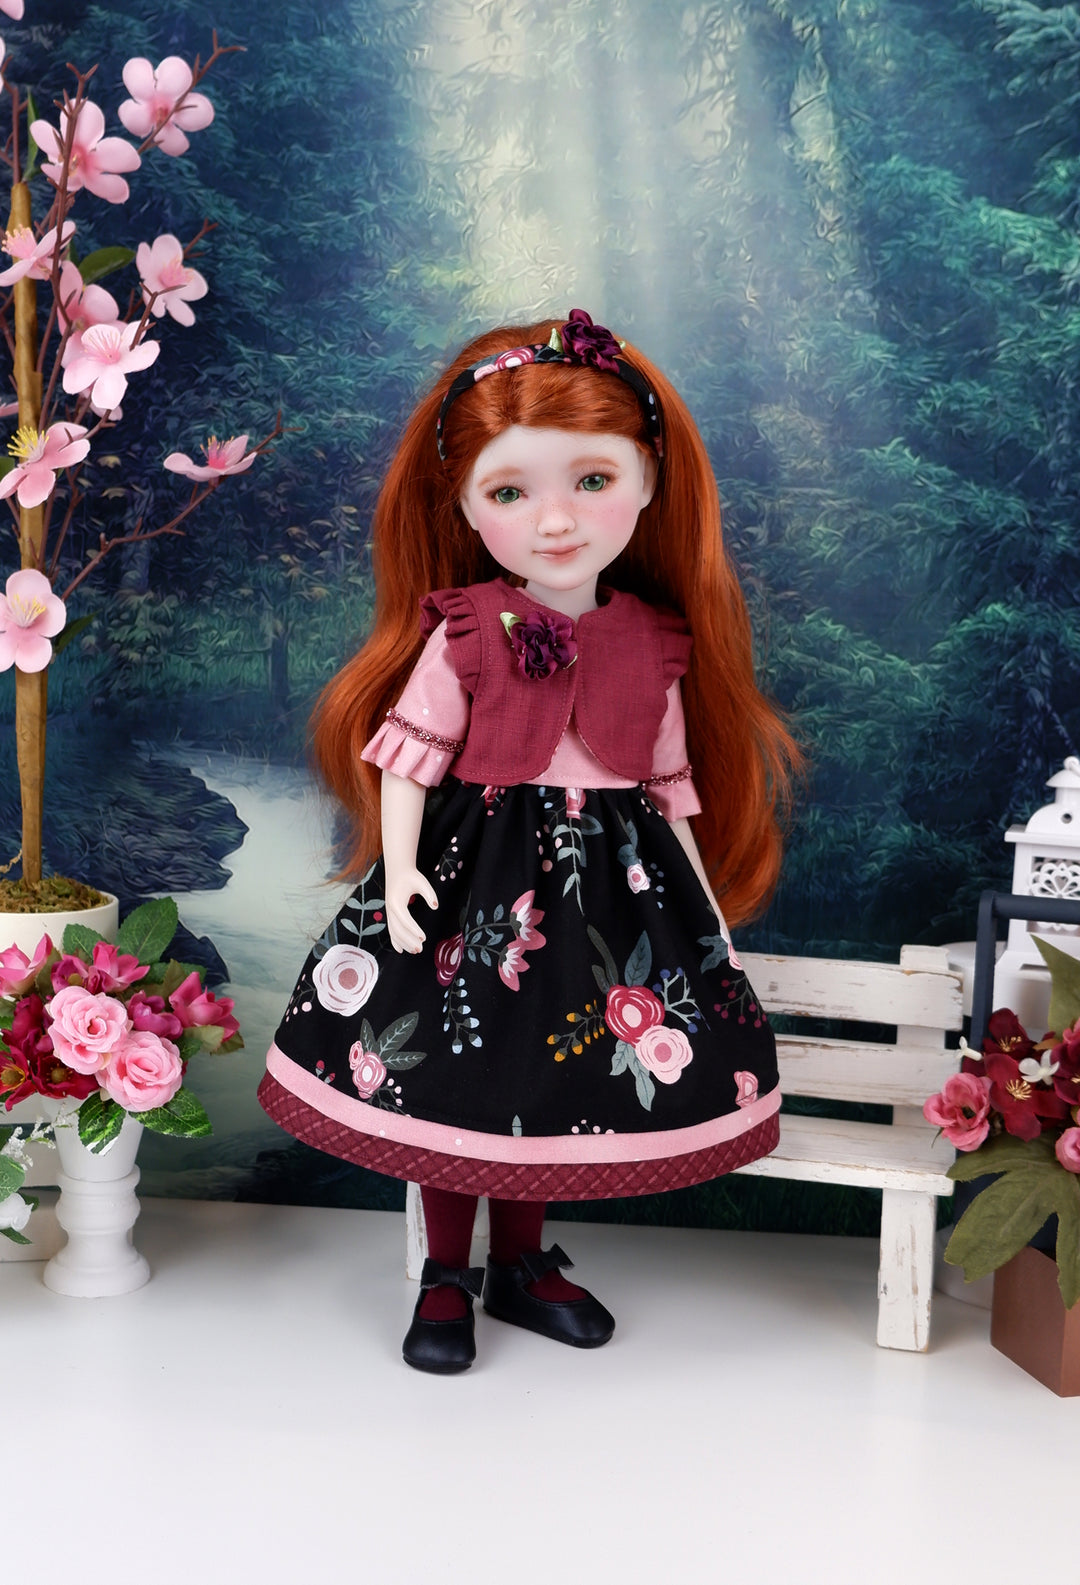 Courtyard Rose - layered dress ensemble with shoes for Ruby Red Fashion Friends doll